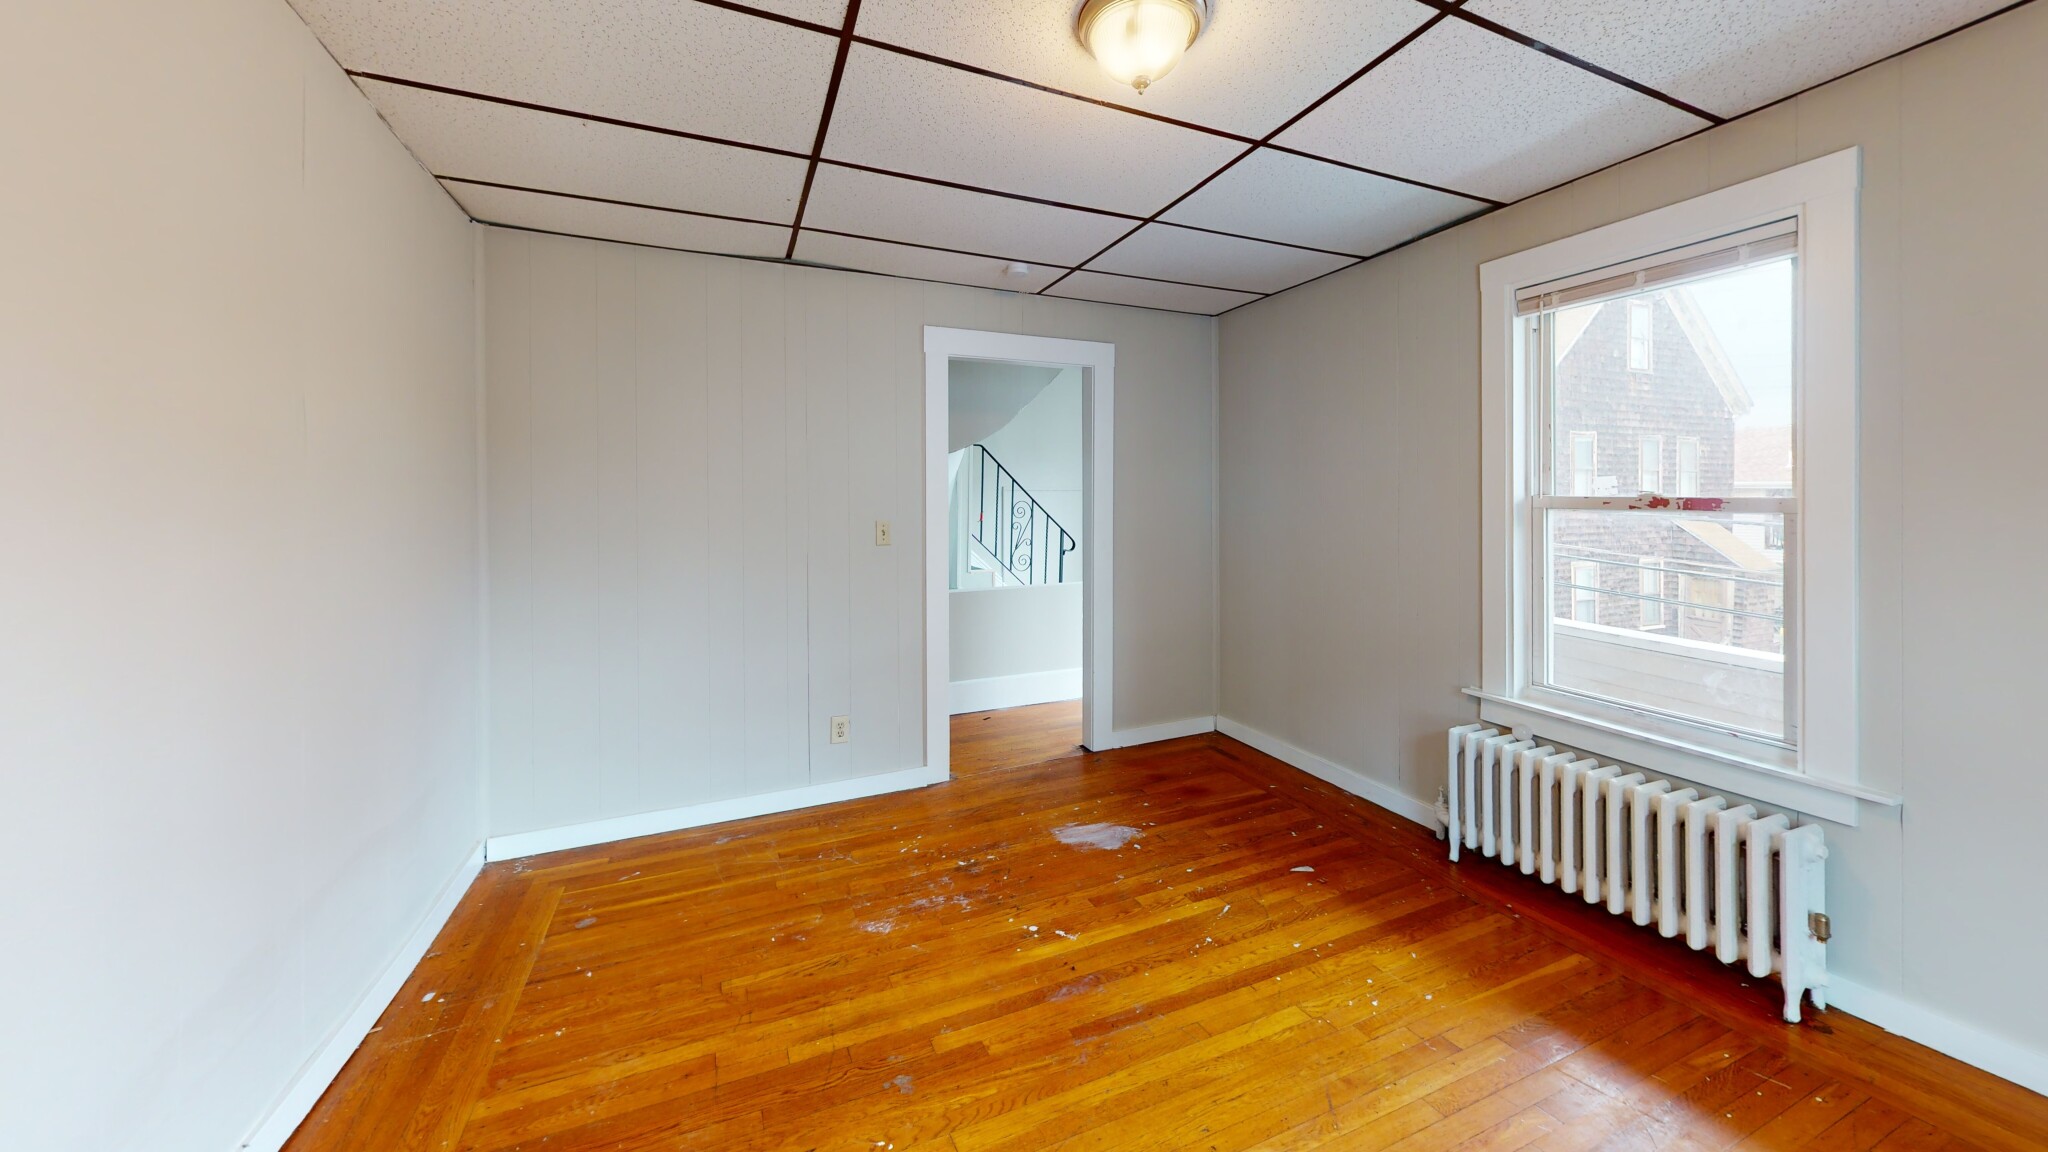 Photos of apartment on Plymouth St.,Everett MA 02149